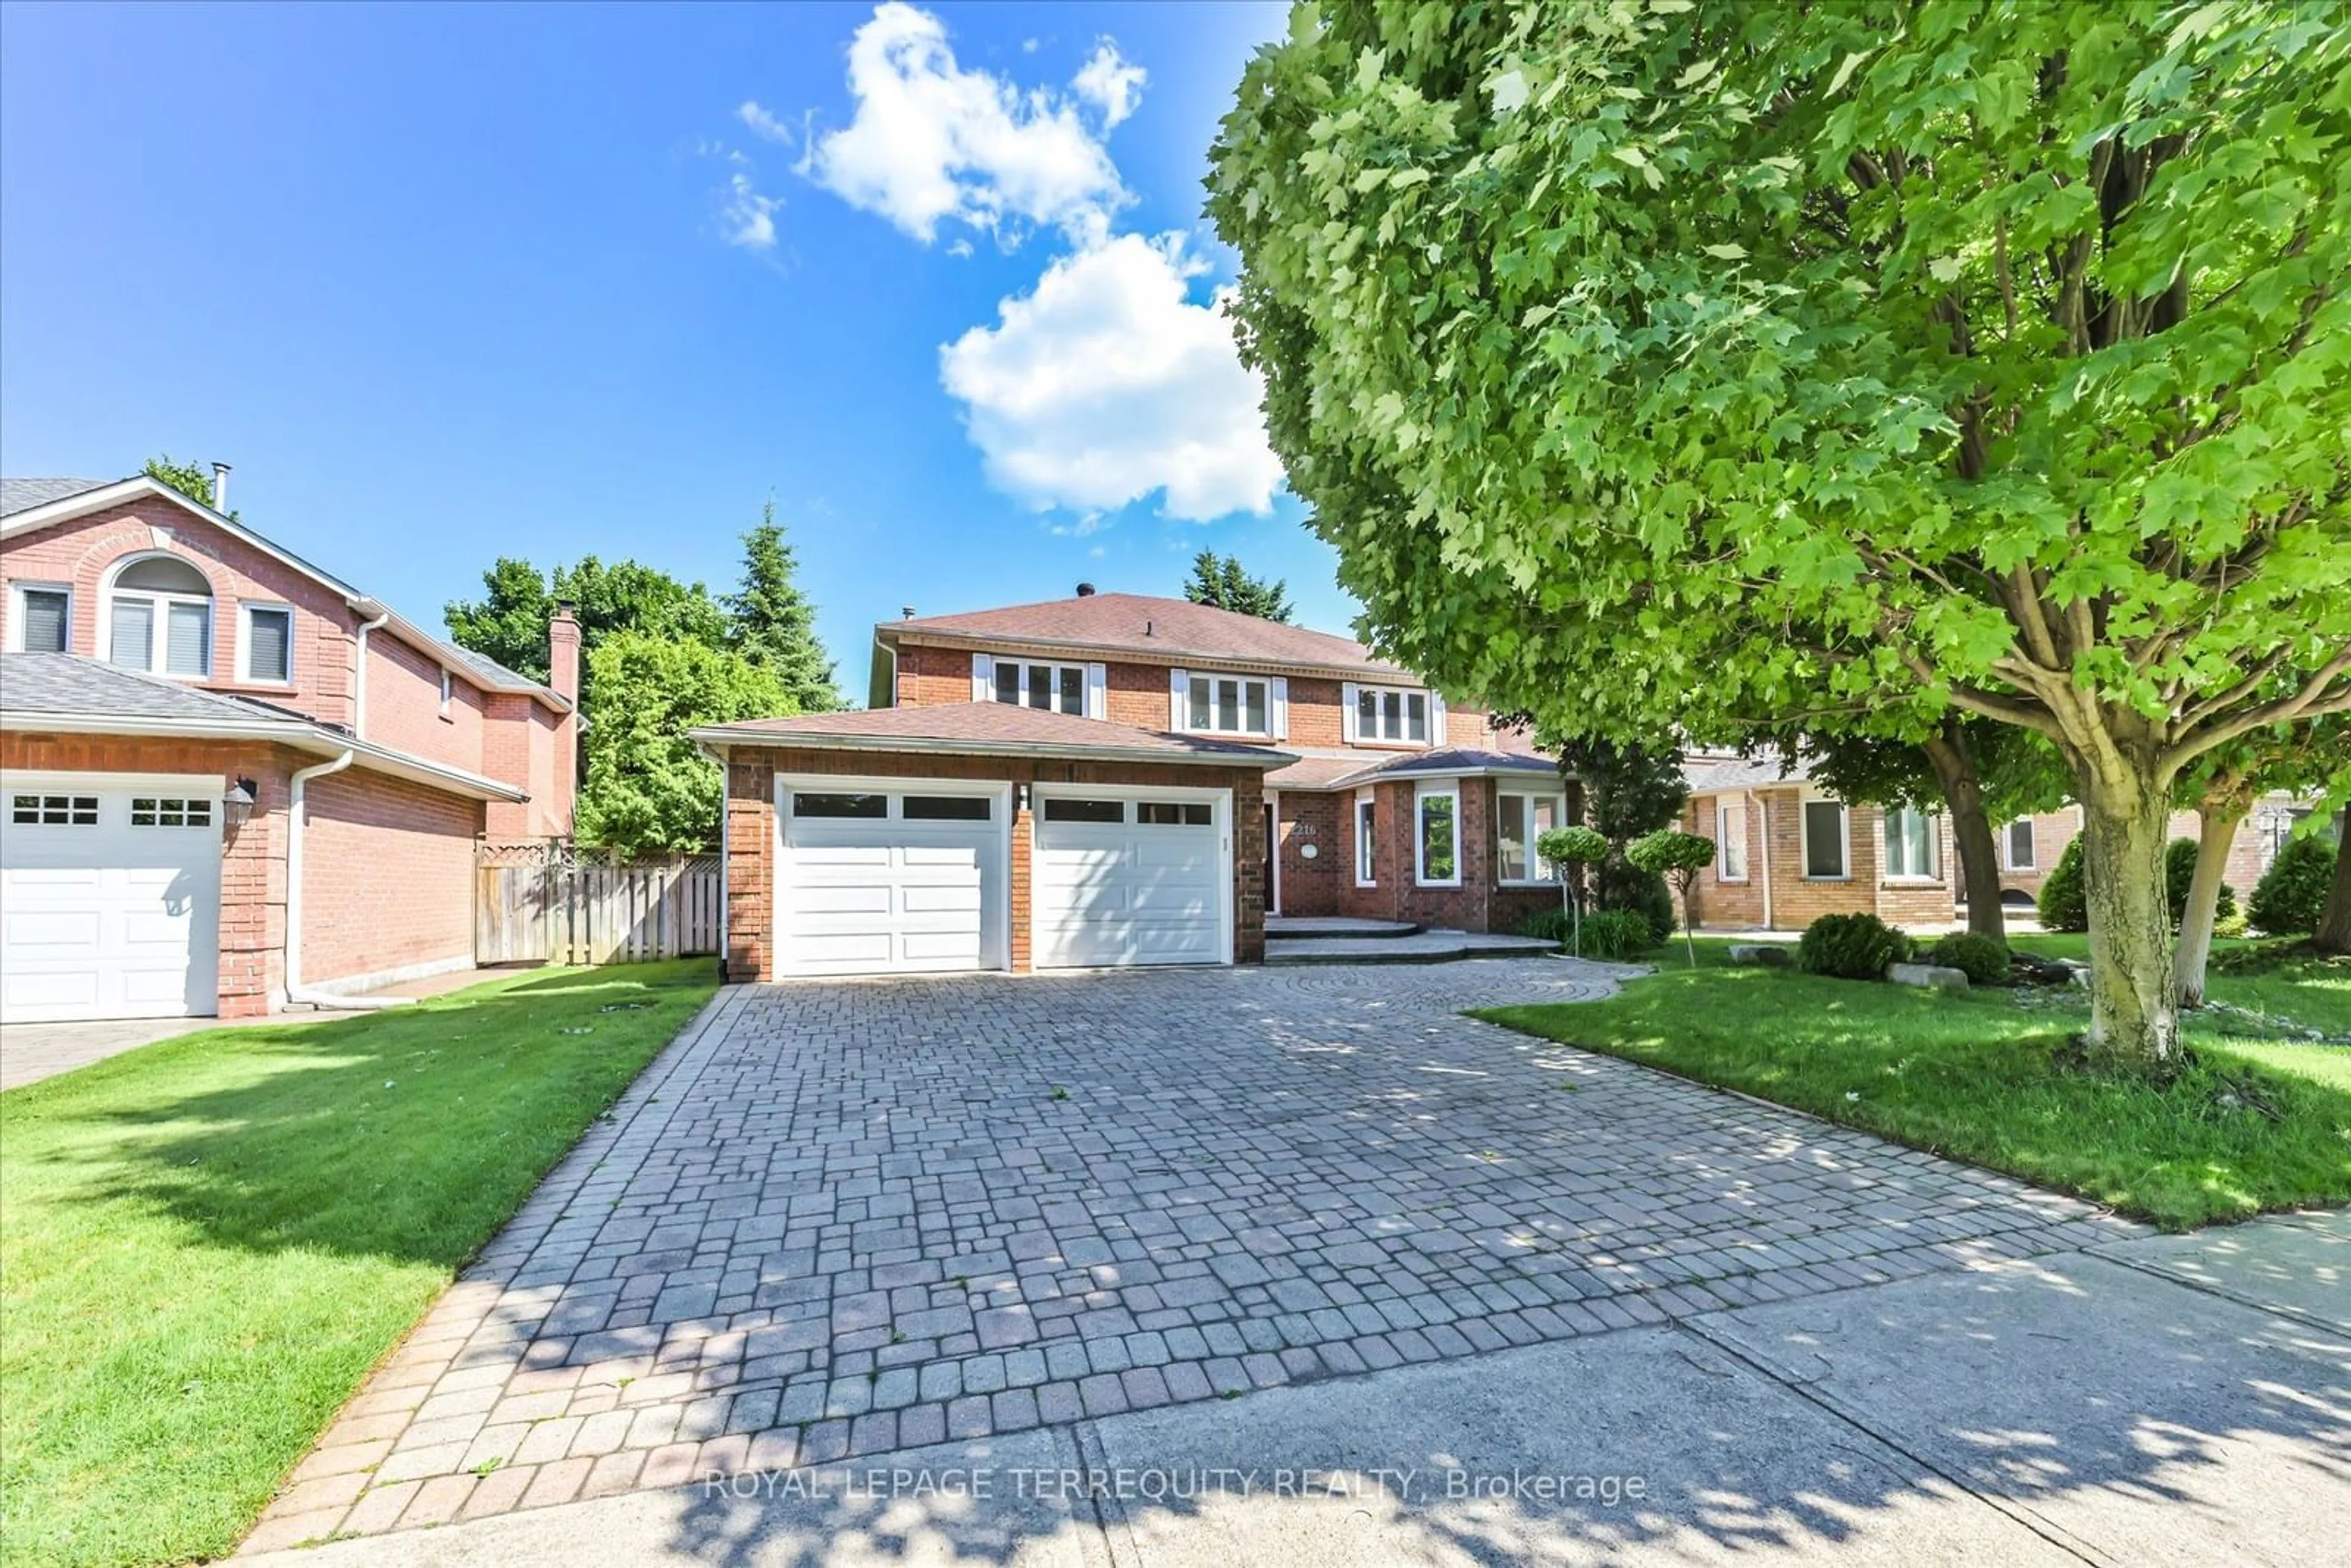 Home with brick exterior material for 2216 Dunvegan Ave, Oakville Ontario L6J 6P7